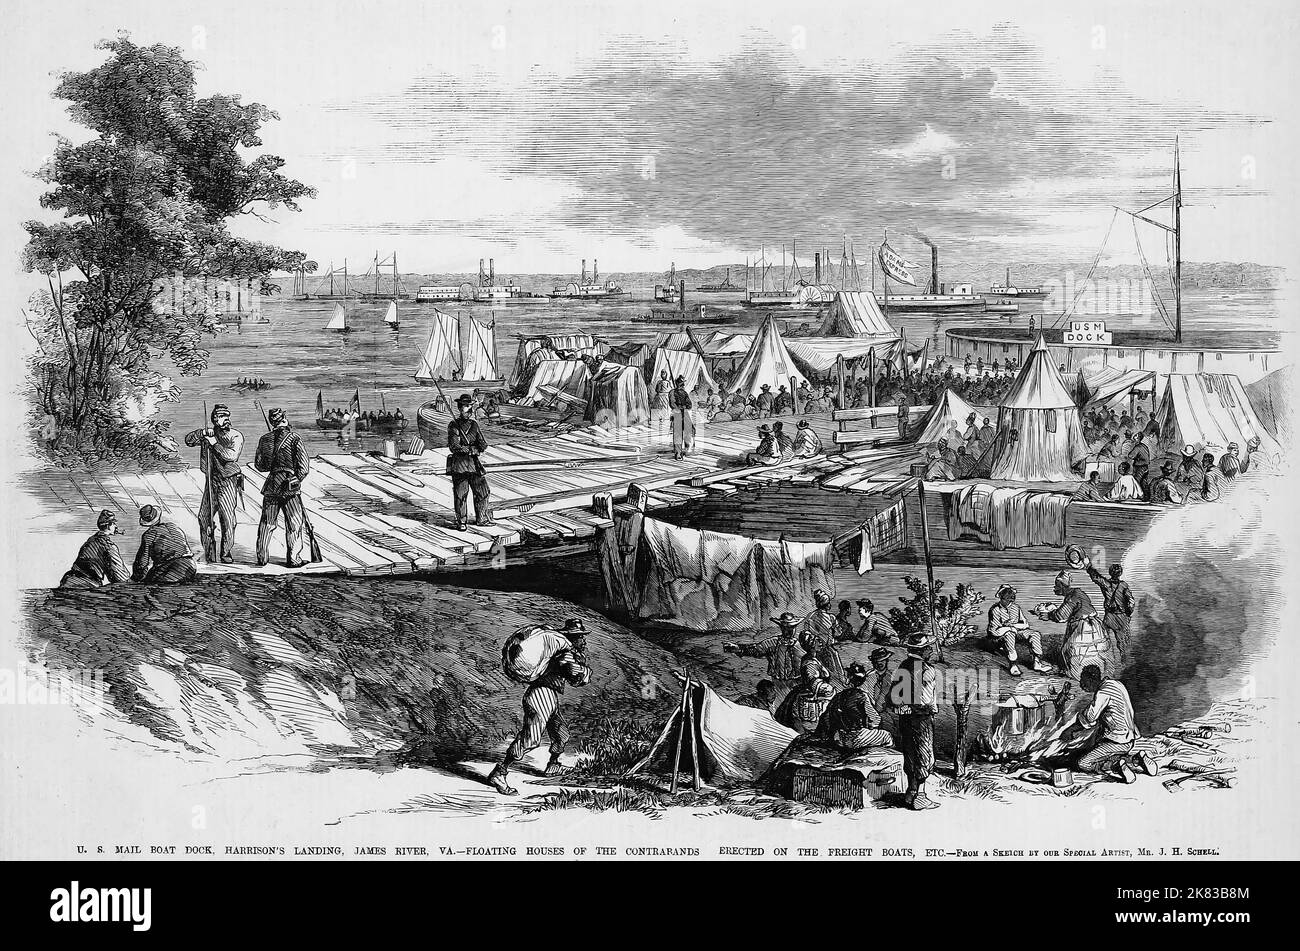 U. S. Mail Boat Dock, Harrison's Landing, James River, Virginia - Floating houses of the contrabands erected on the freight boats, etc. July 1862. 19th century American Civil War illustration from Frank Leslie's Illustrated Newspaper Stock Photo